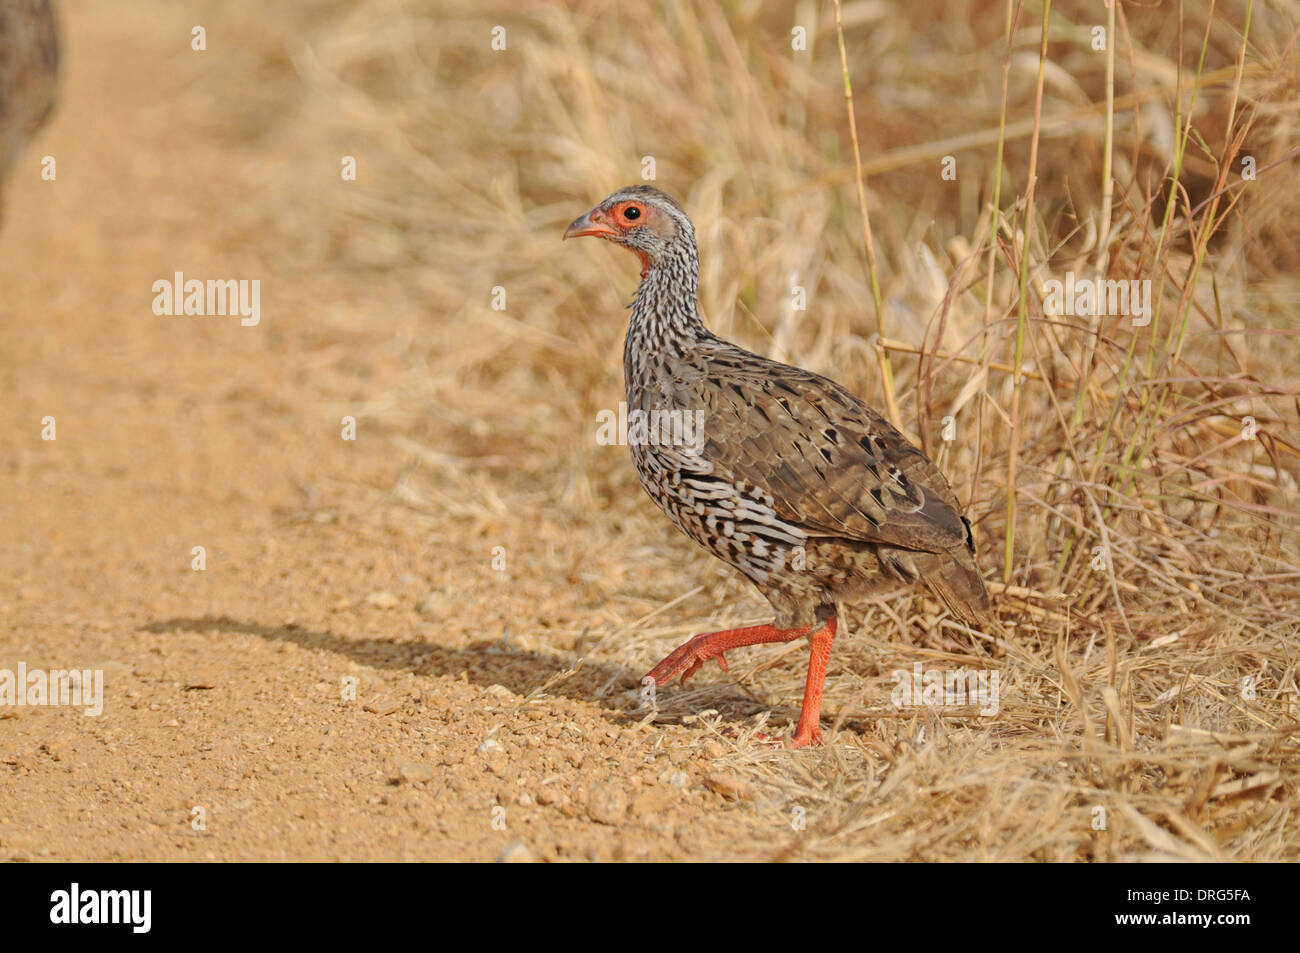 Red-necked spurfowl (Francolinus afer) Stock Photo